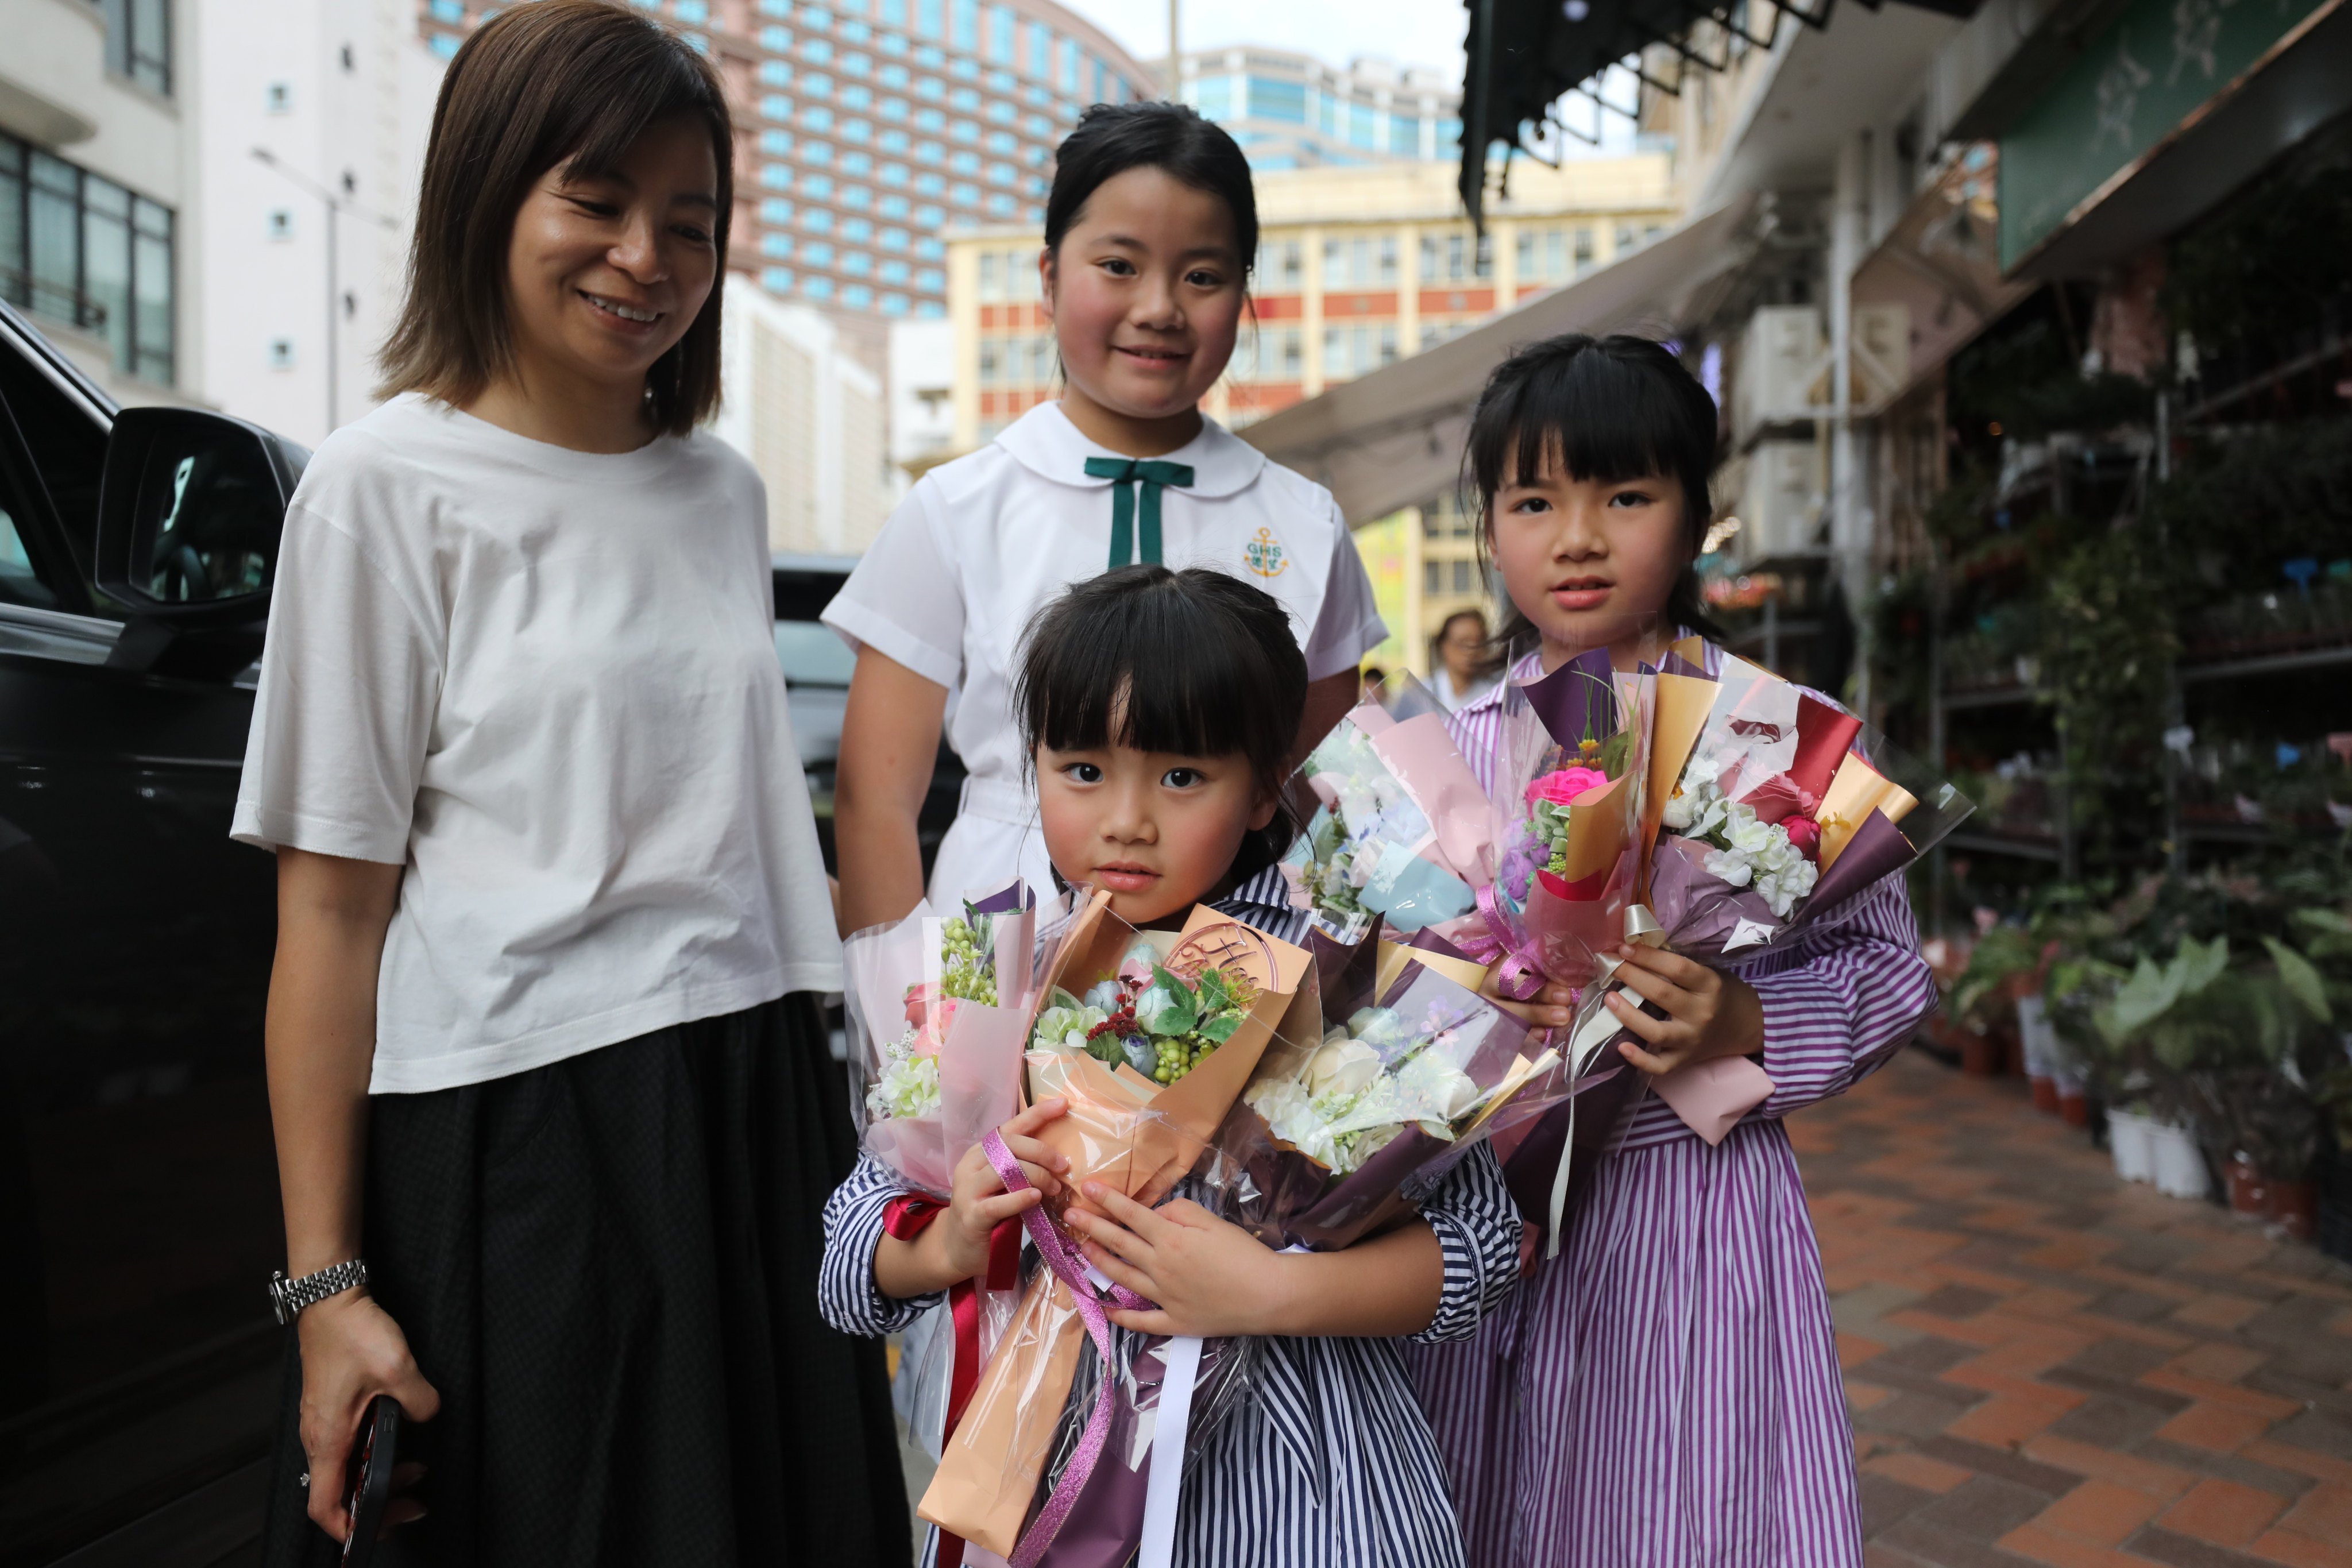 Housewife Macy Law (left) went shopping with her three daughters to pick up seven bouquets at a cost of HK$490. Photo: Xiaomei Chen